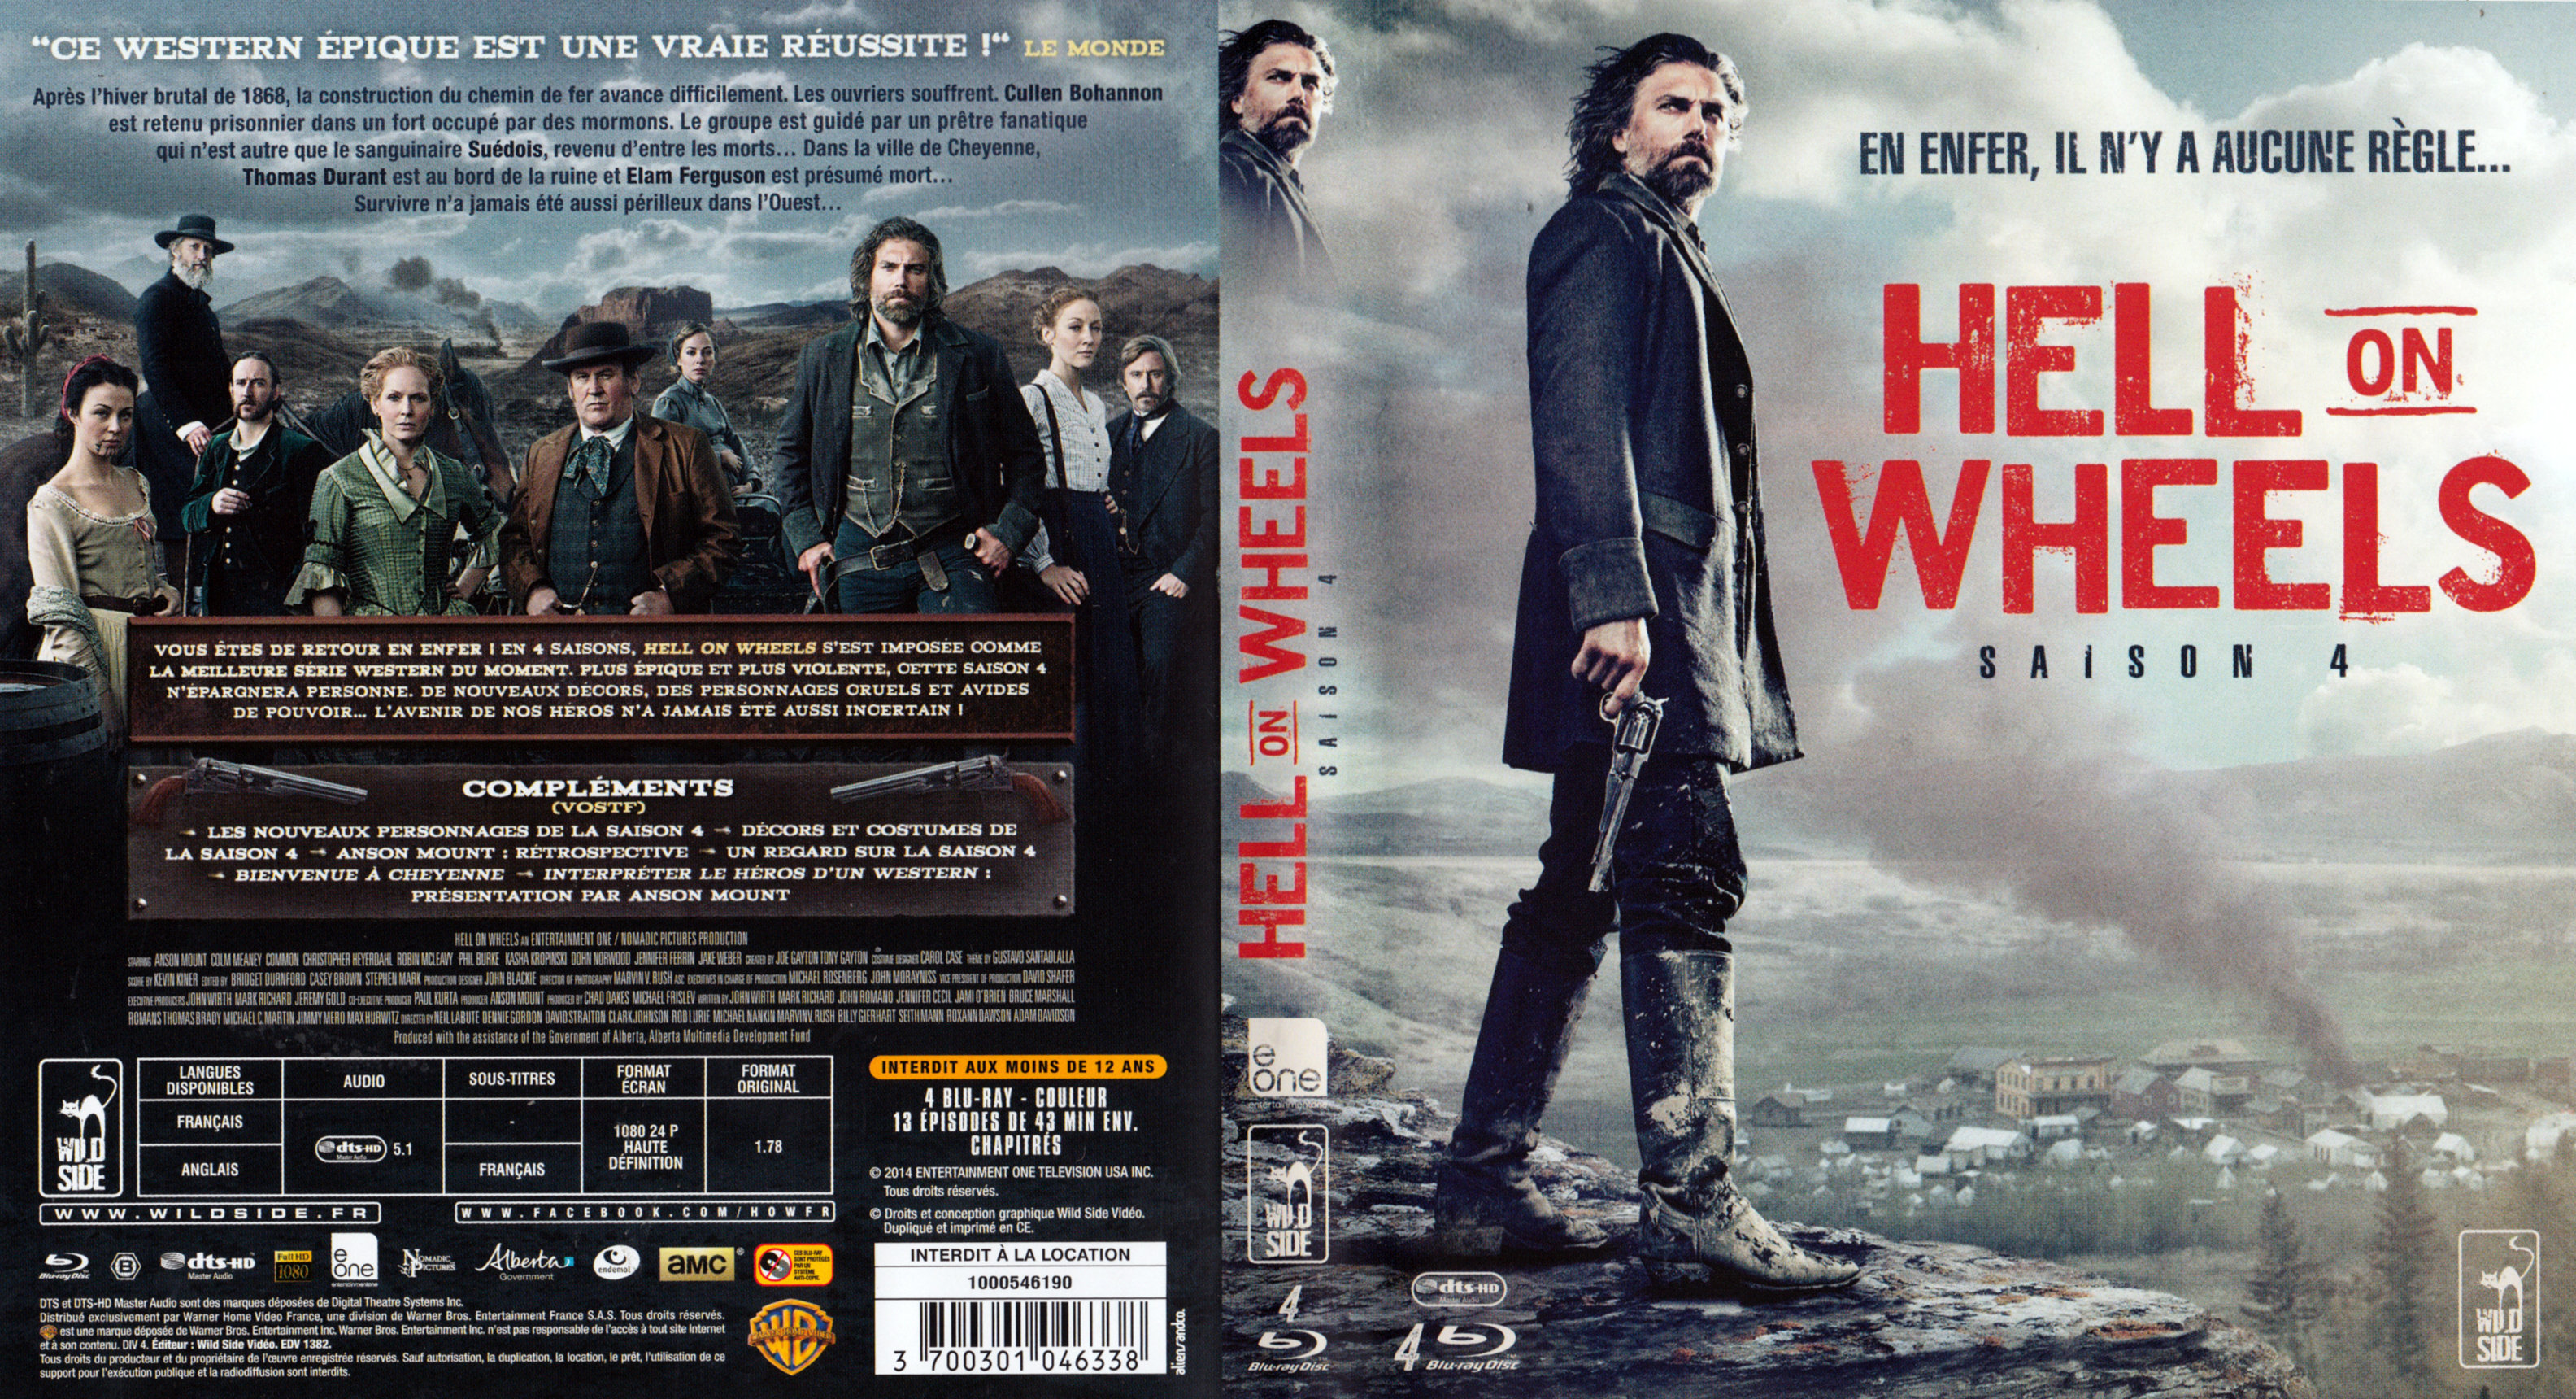 Jaquette DVD Hell on Wheels Saison 4 (BLU-RAY)